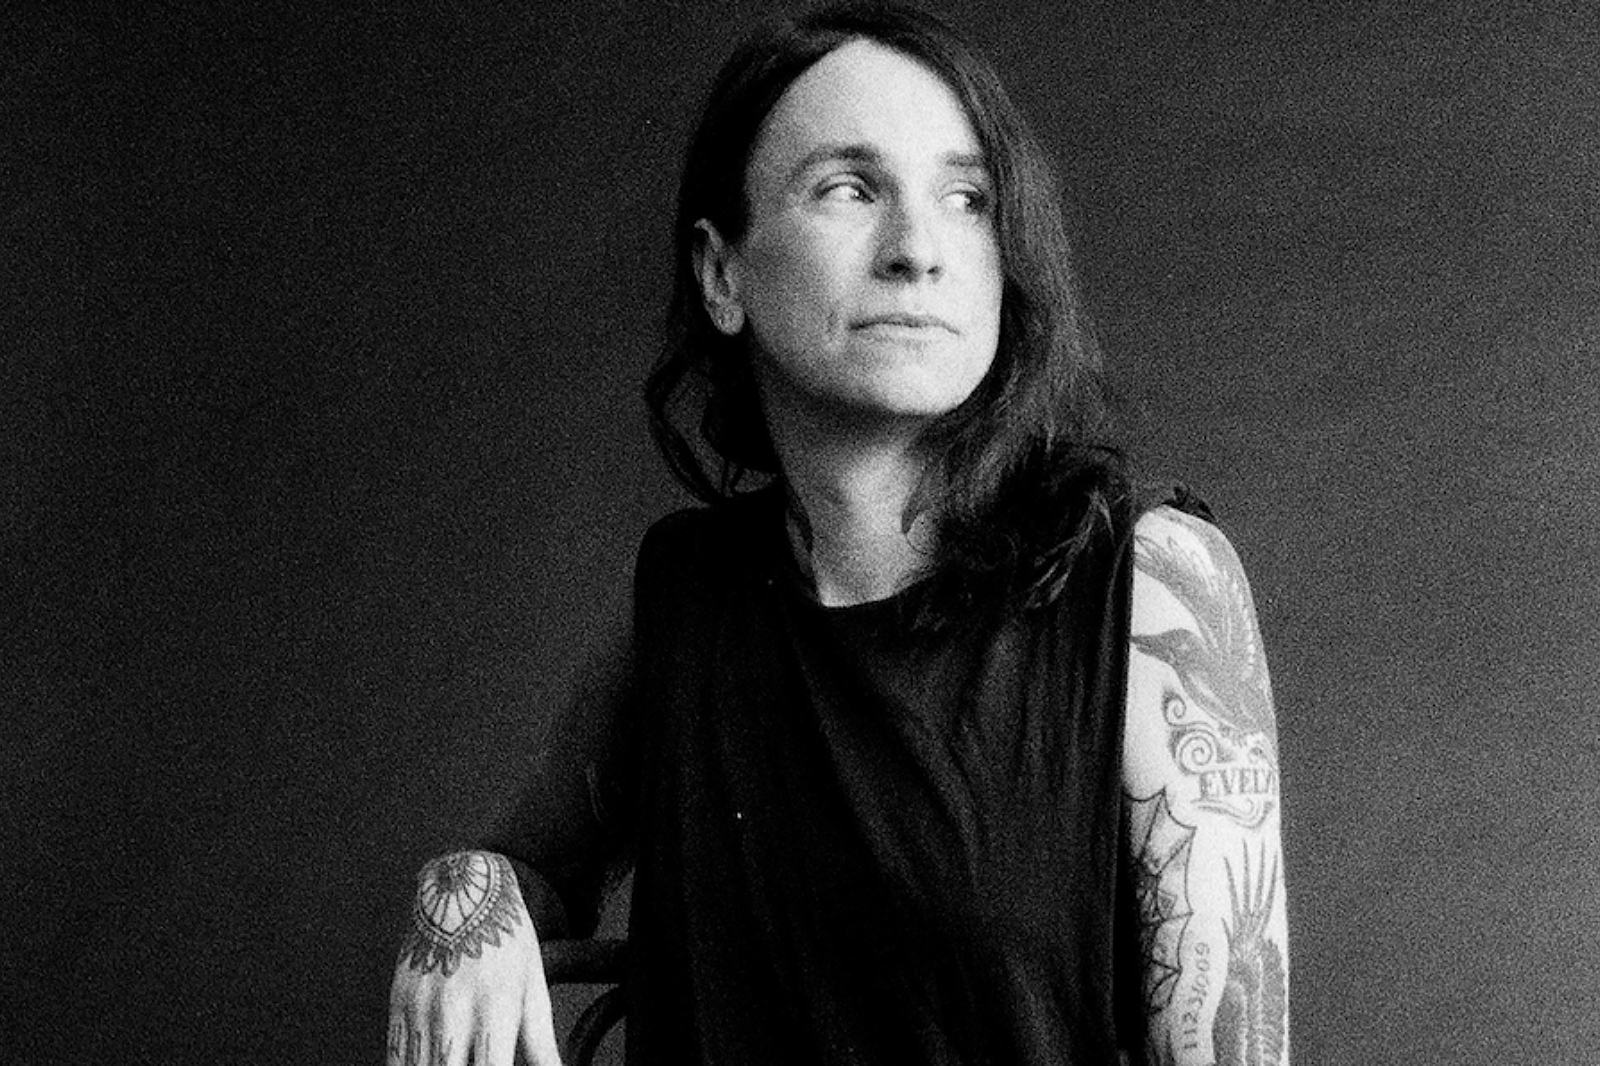 Laura Jane Grace: "What am I trying to say with this album? I'm saying STAY ALIVE!"